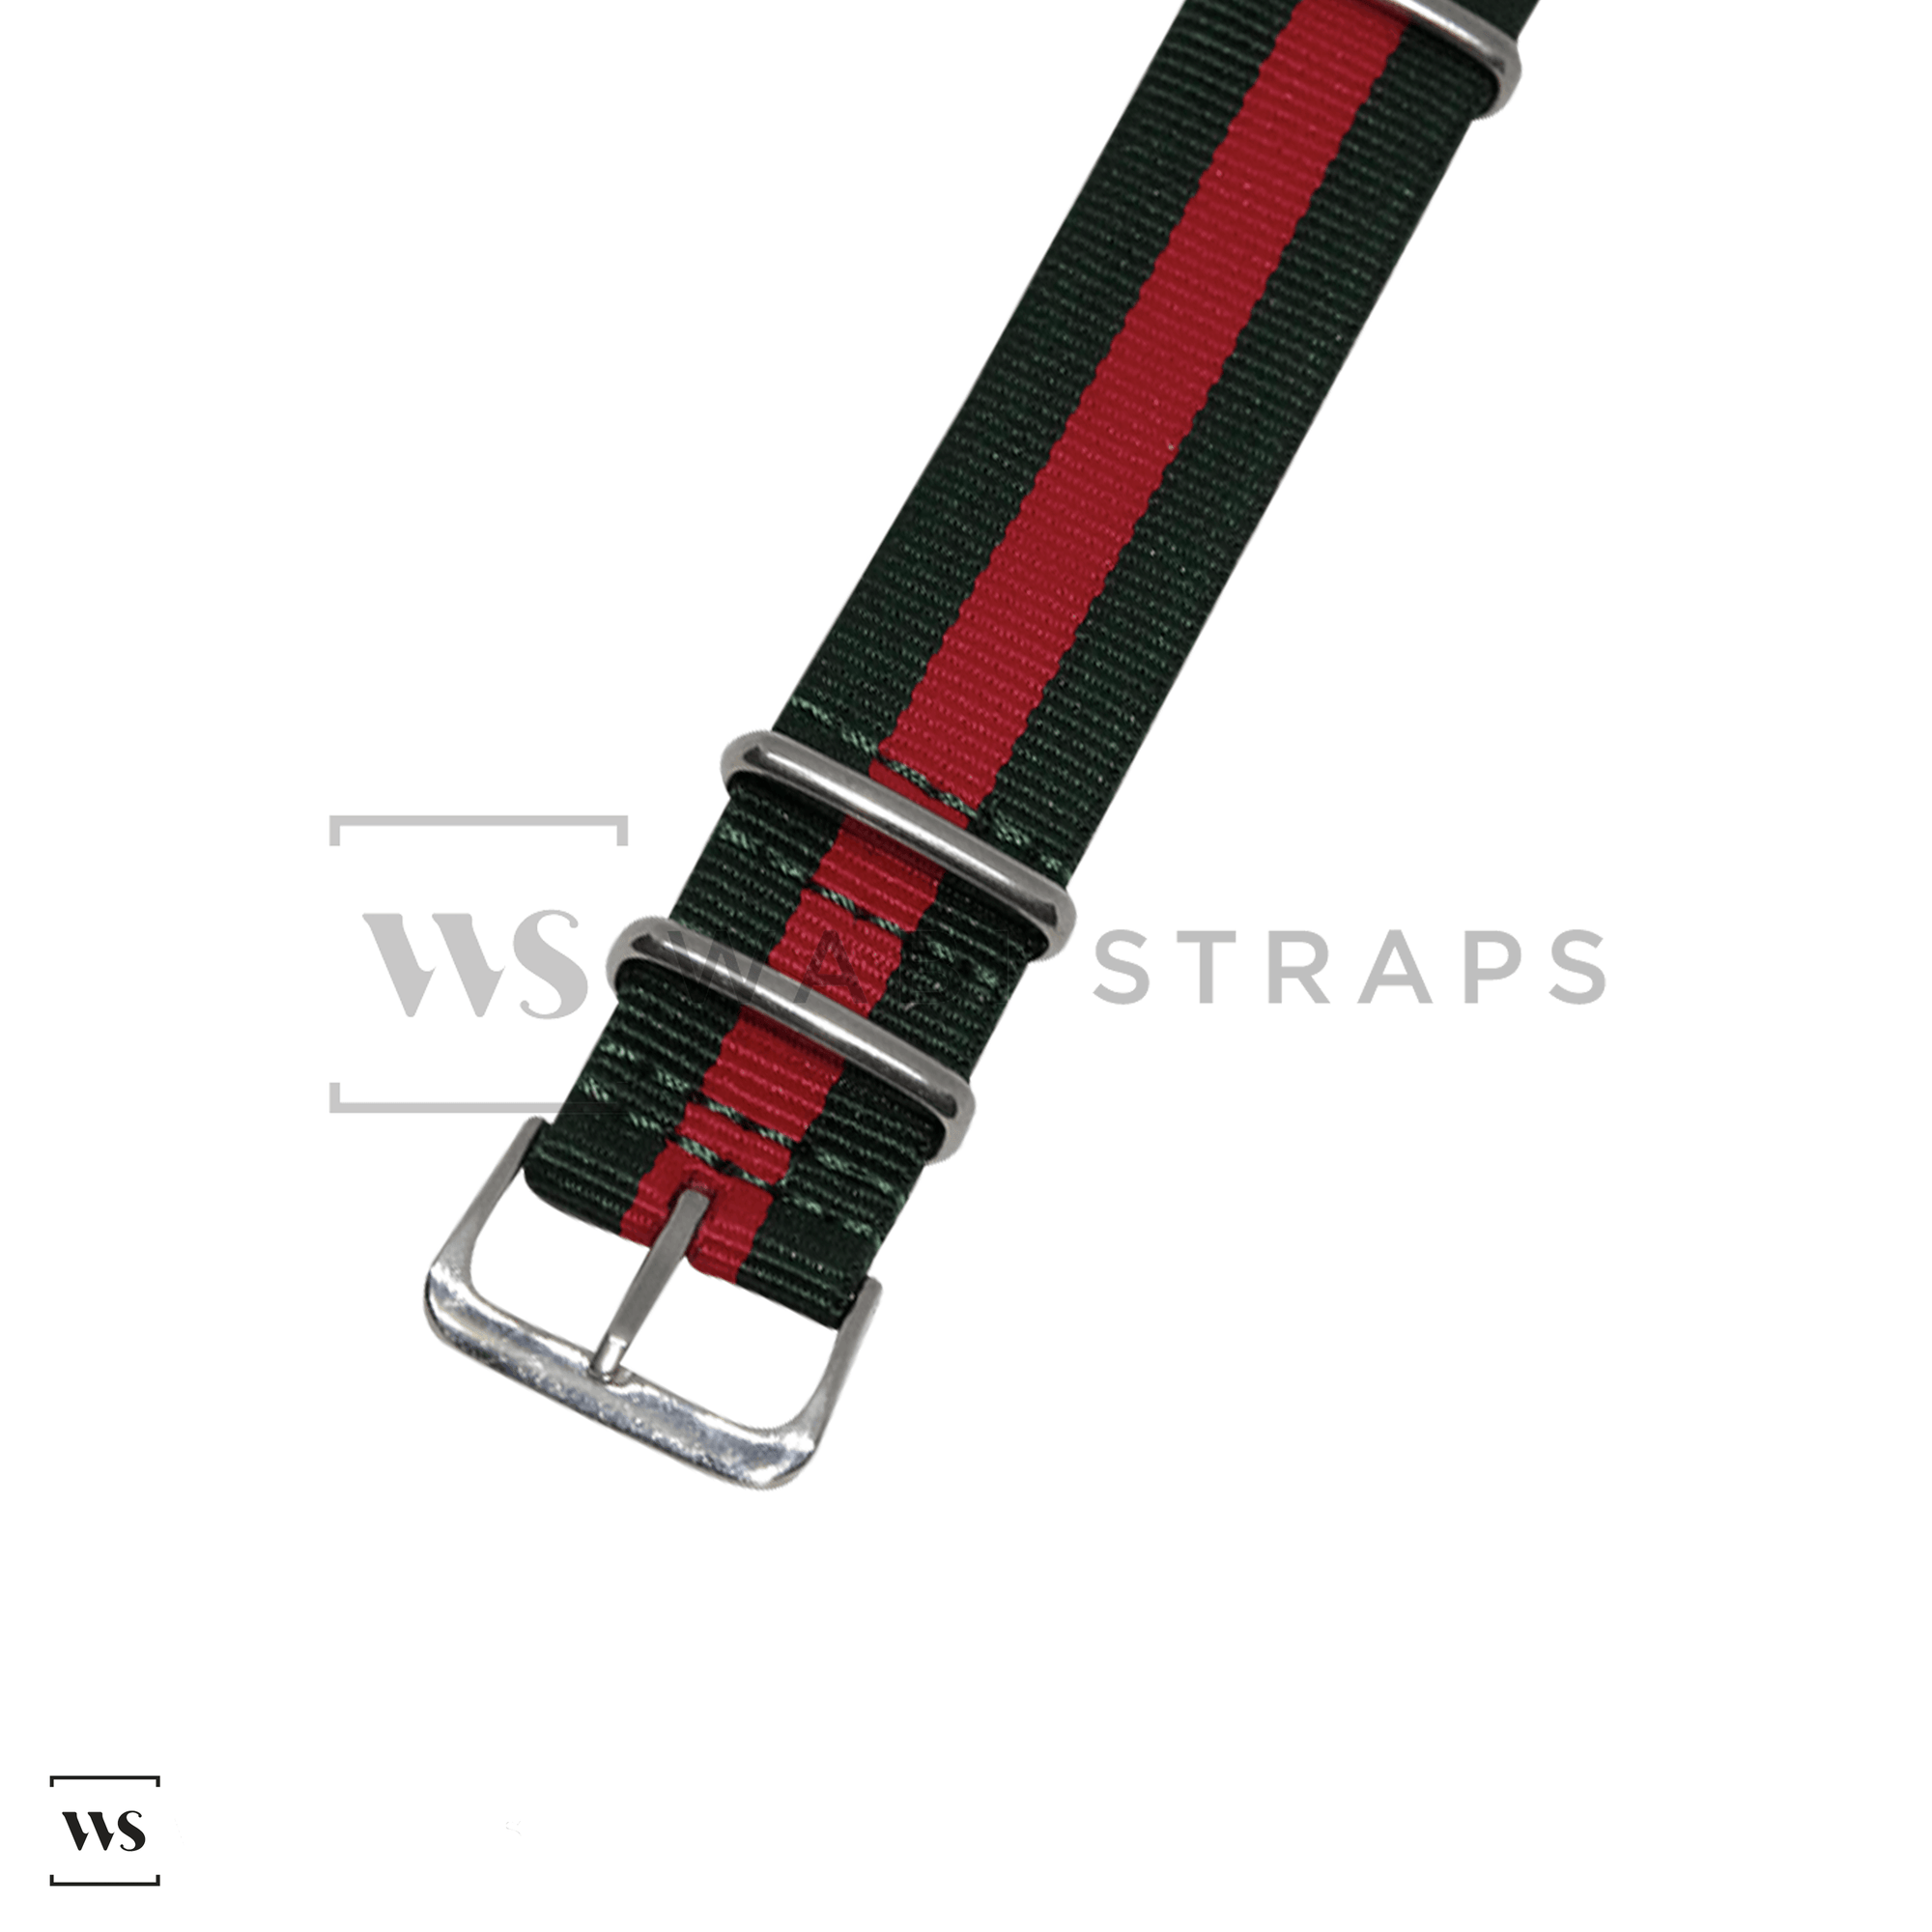 Green & Red Classic British Military Watch Strap